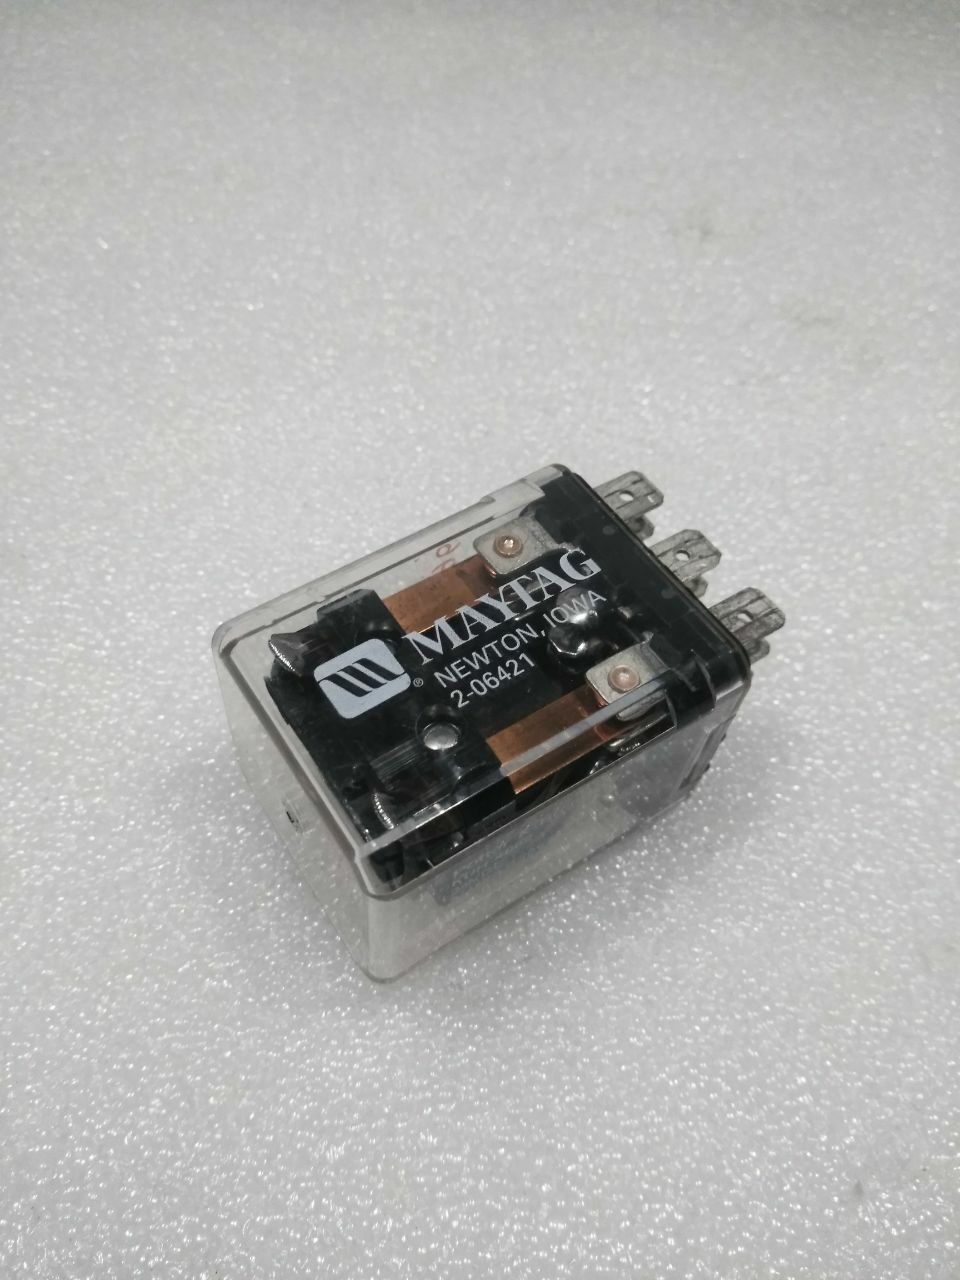 Washer/Dryer REVERSING (SPIN) RELAY FOR MAYTAG P/N: WPW10133279 206421 [USED] - $0.98